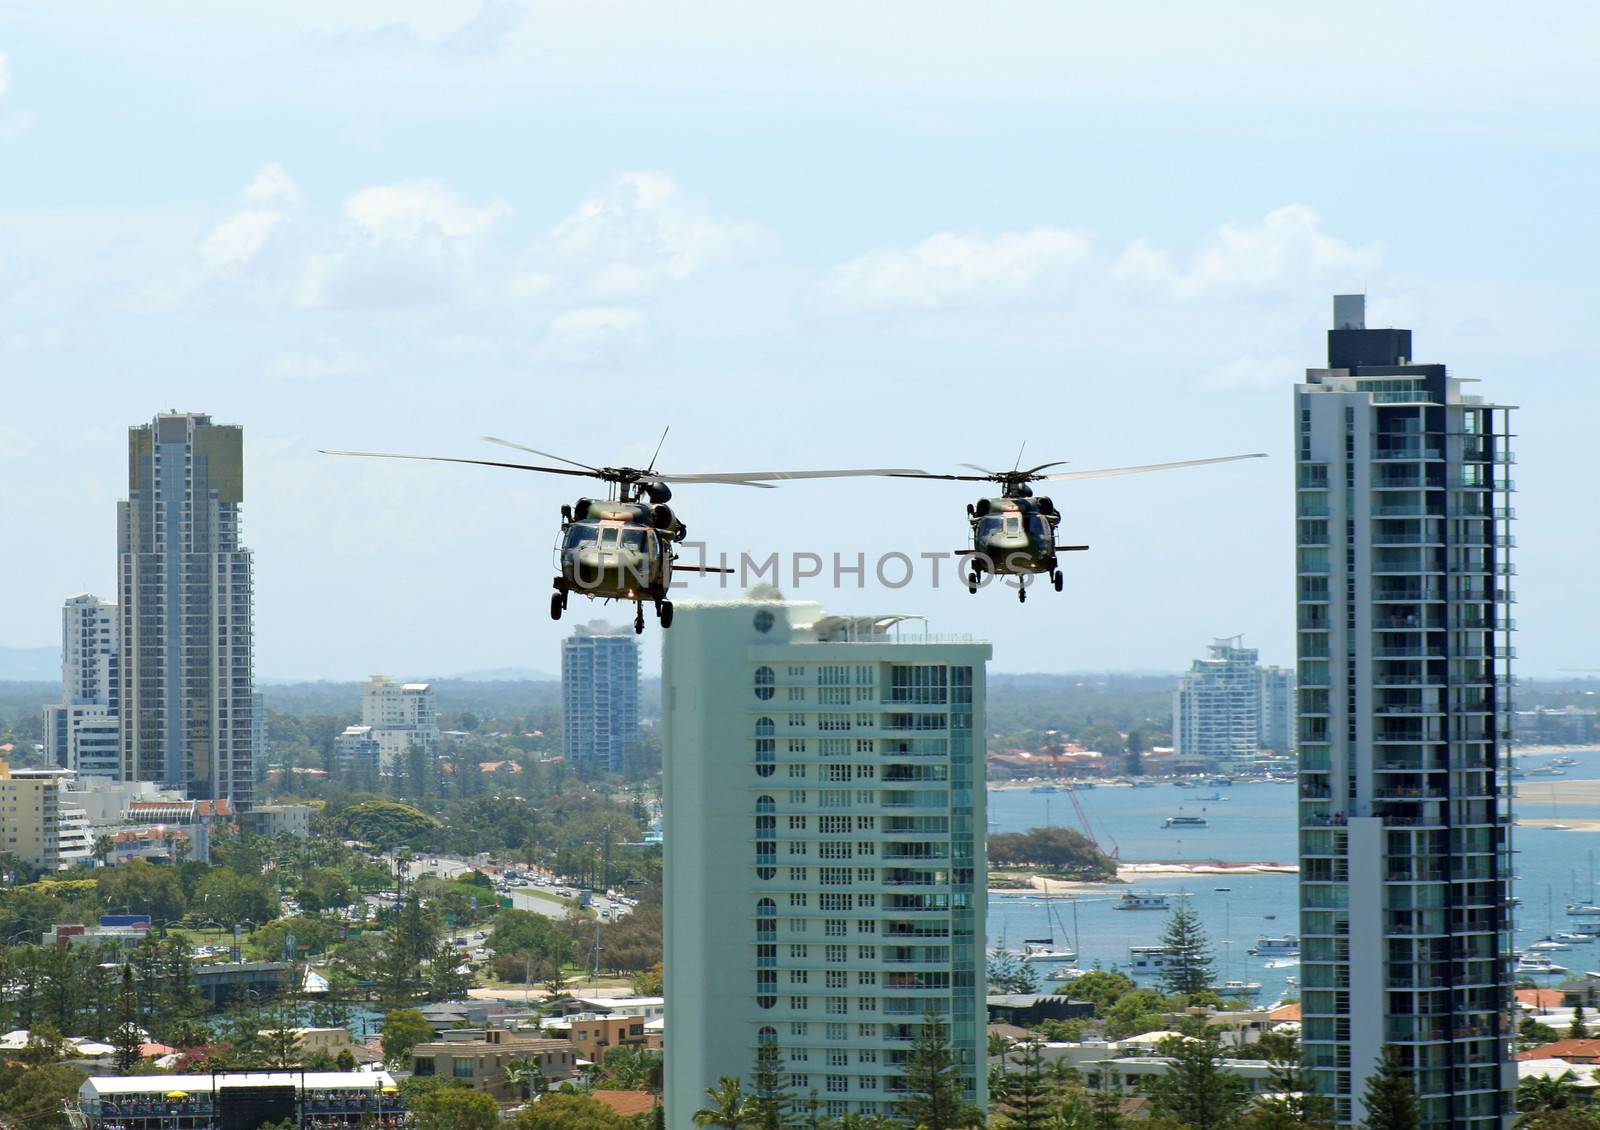 Australian Army Black choppers fly North across Surfers Paradise and the Gold Coast.